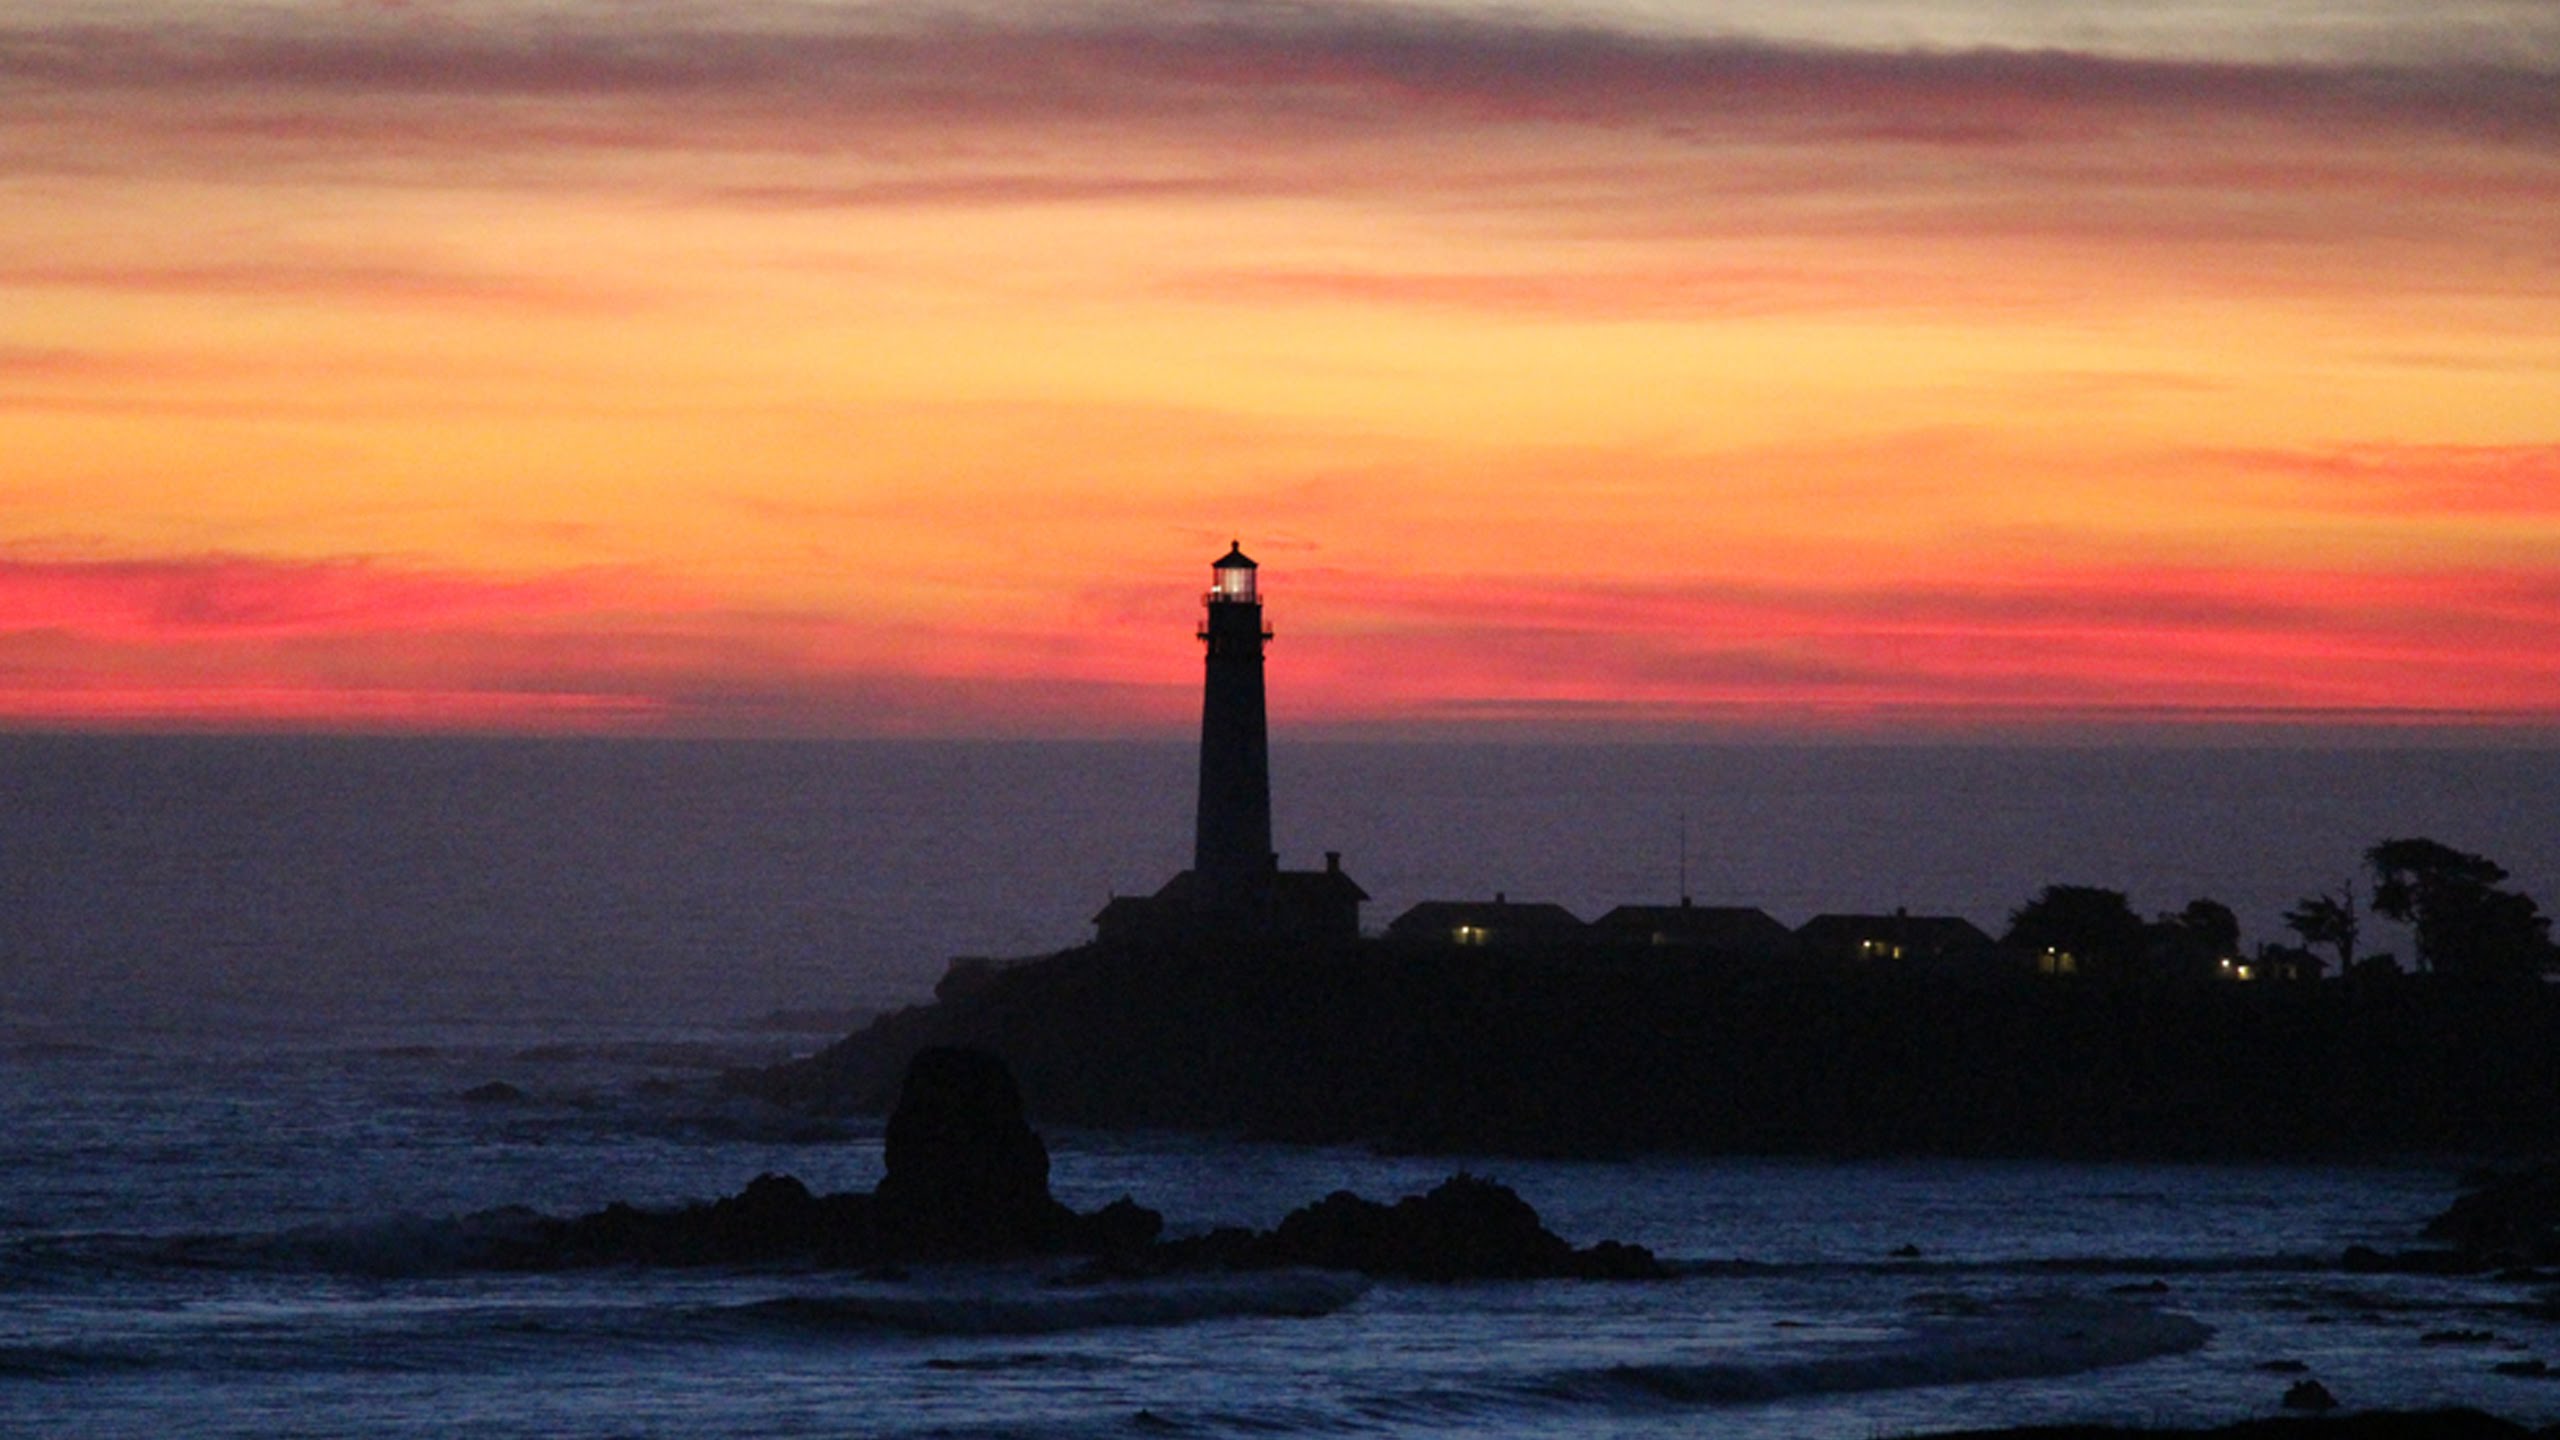 Sunset at Pacific Ocean Lighthouse - YouTube